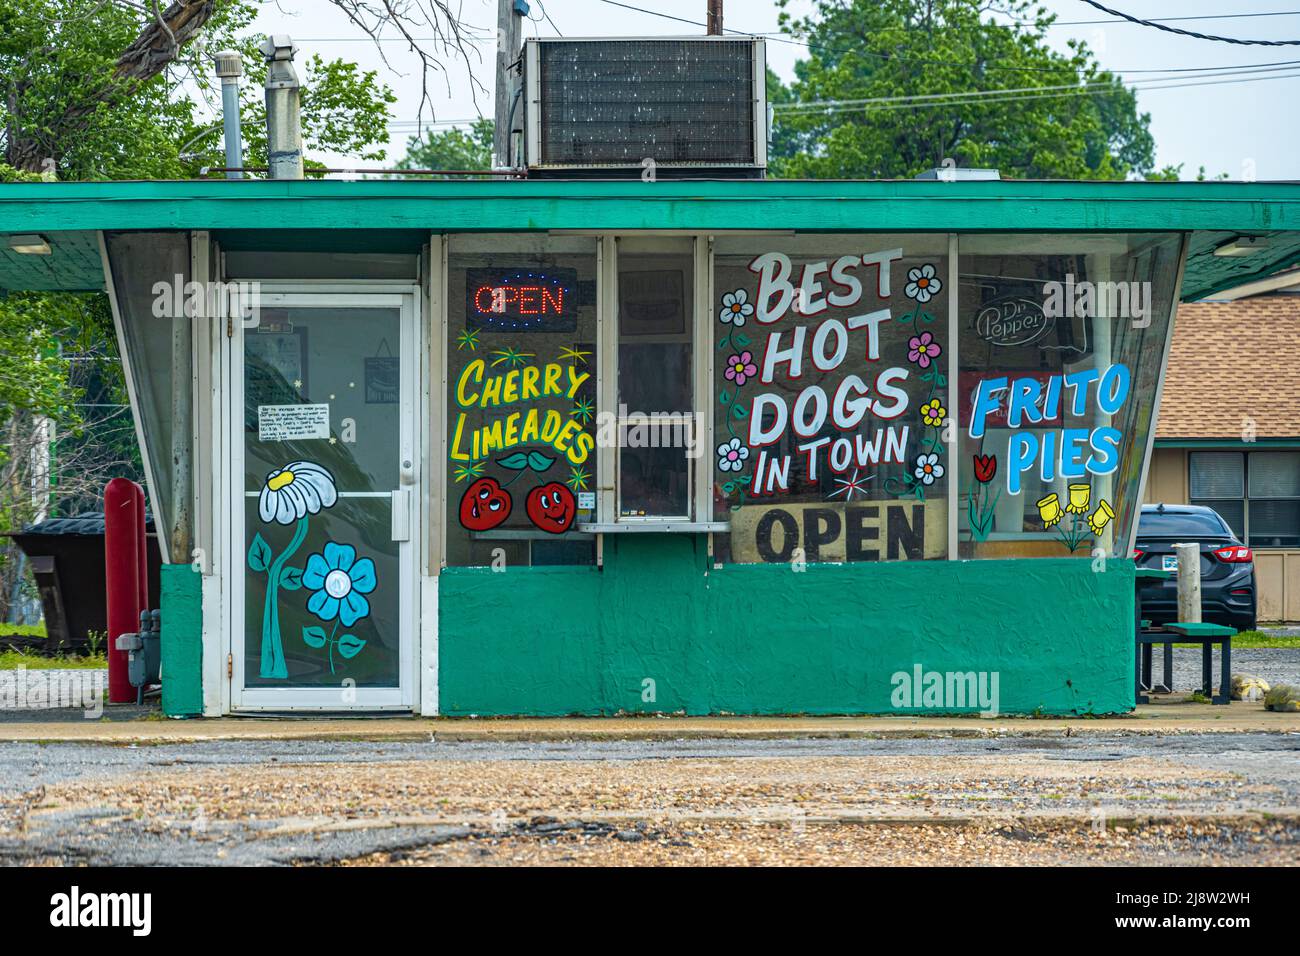 Chet's Dairy Freeze in Muskogee, Oklahoma, bietet Cherry Limeade, Frito Pies und die „Best Hot Dogs in Town“. (USA) Stockfoto